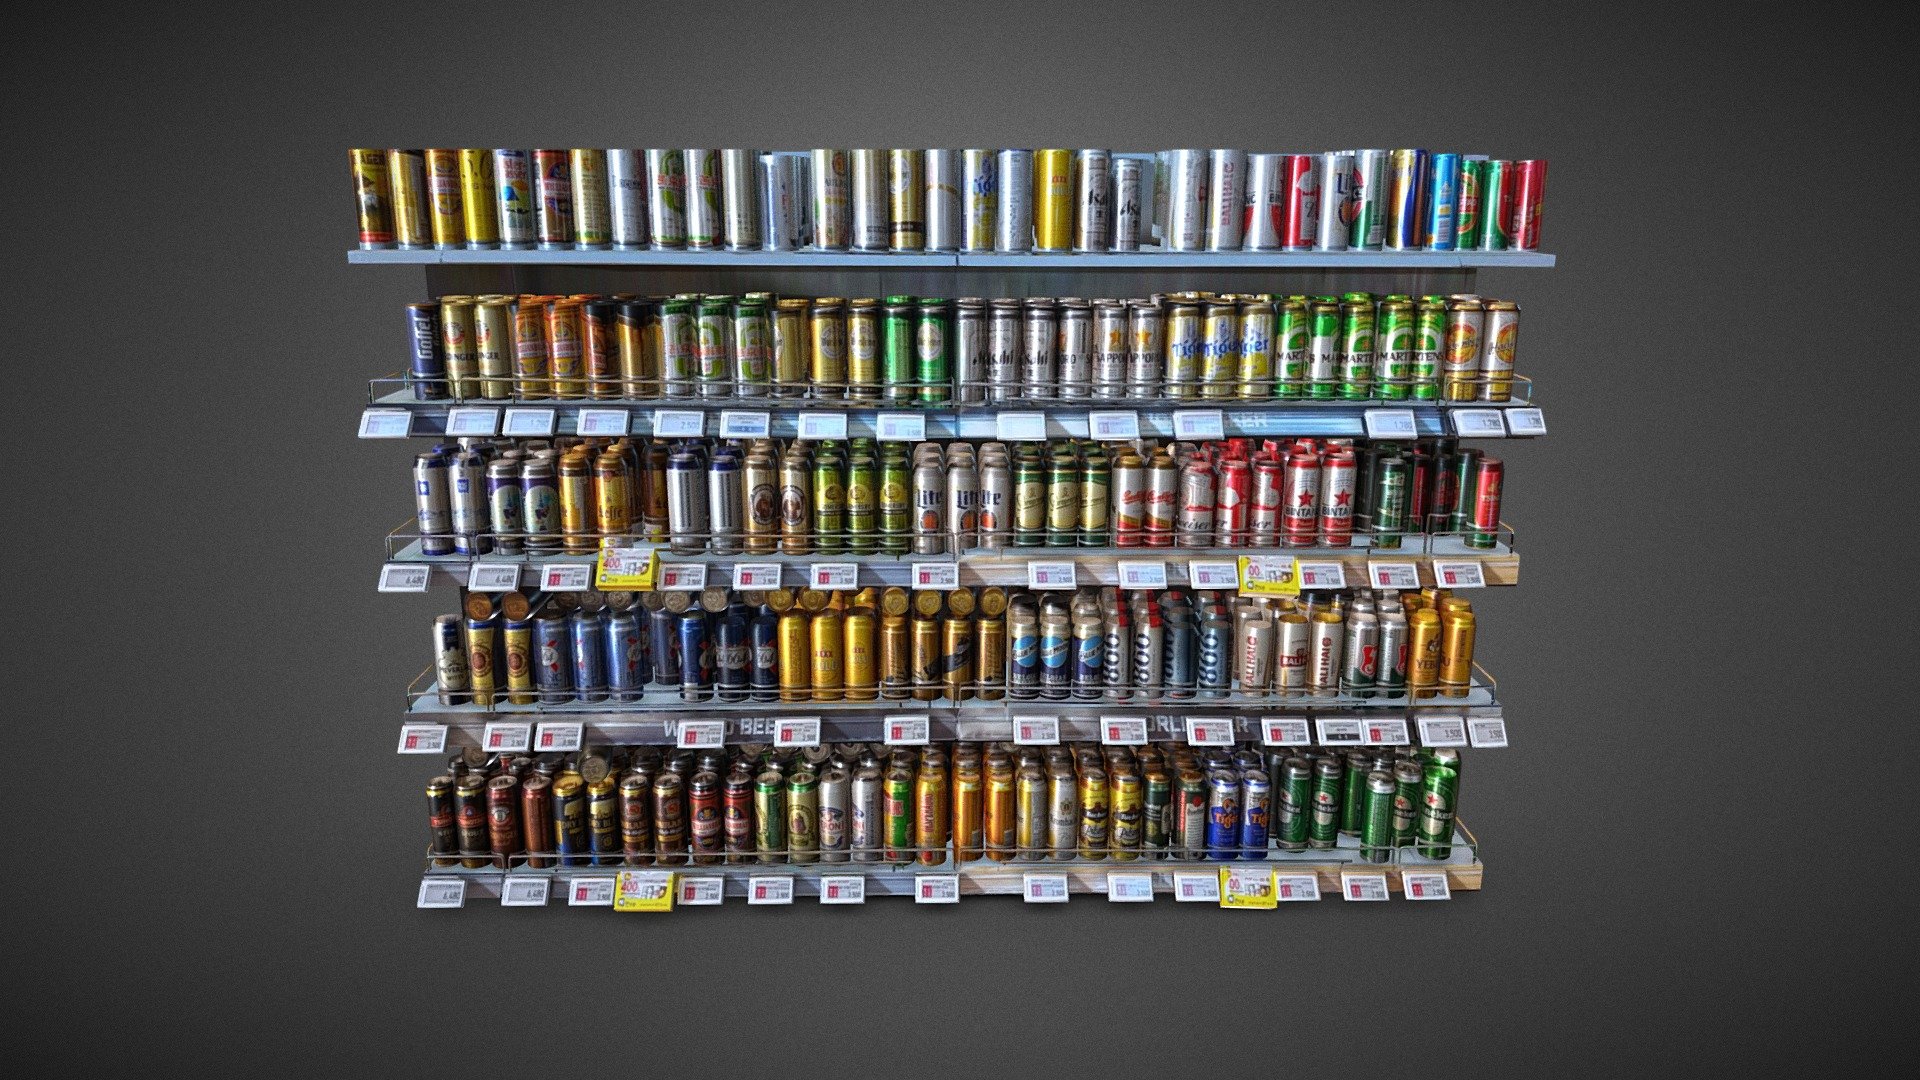 A simple yet realistic looking shelf of beverages and drinks you would find in a supermarket.

Ideal as a background asset in a mall for an animation or VFX 3d model